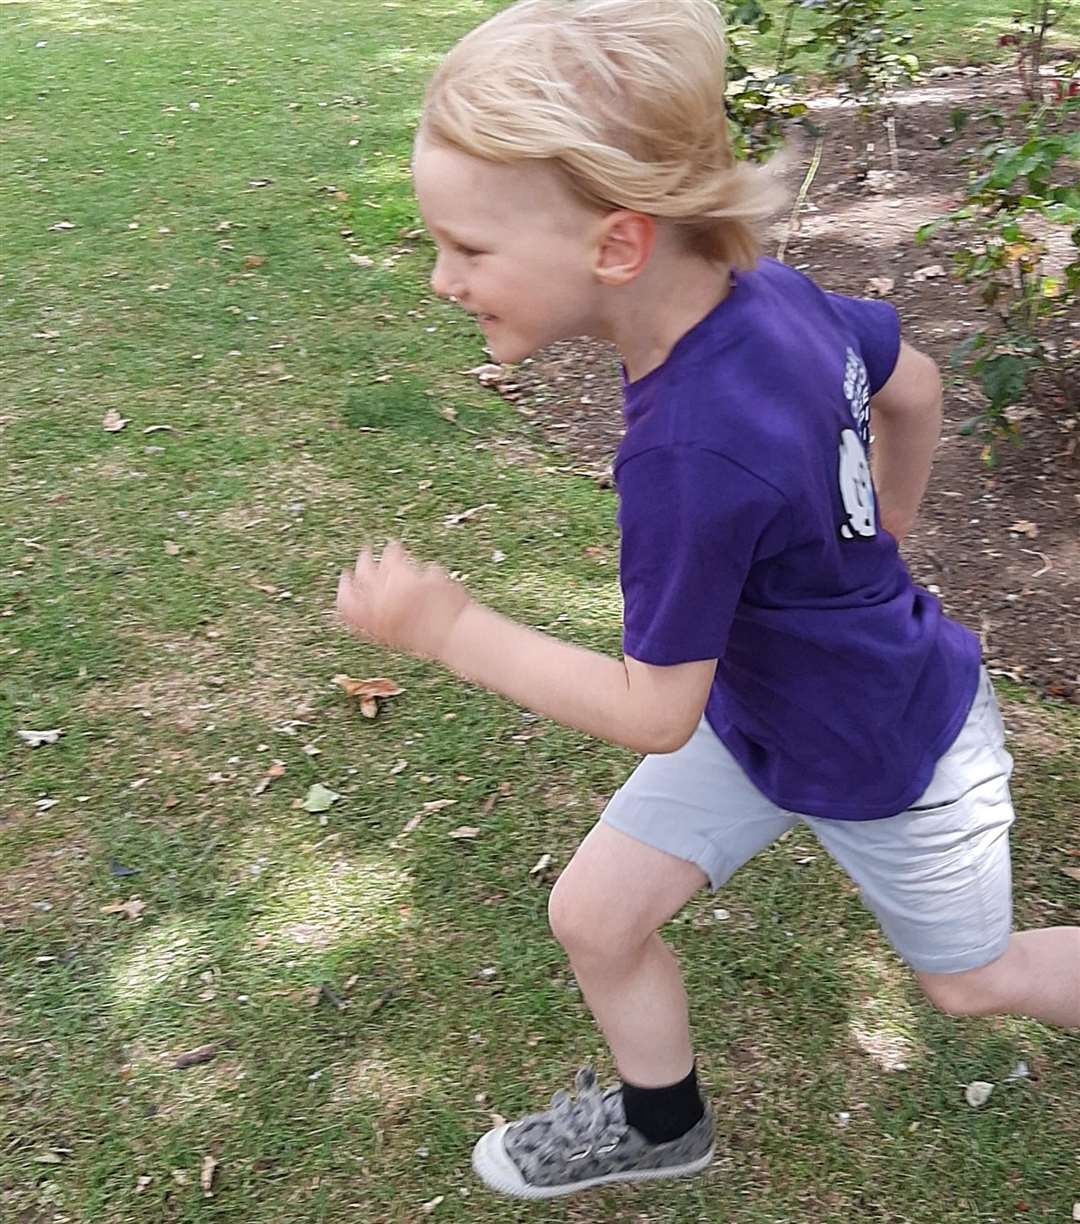 Blue streak: Four-year-old Rory Newing from Sheppey was born with a deformed heart and saved by surgeons at Great Ormond Street Hospital. He is now repaying that debt by running 31k around Sheerness for the London children's hospital